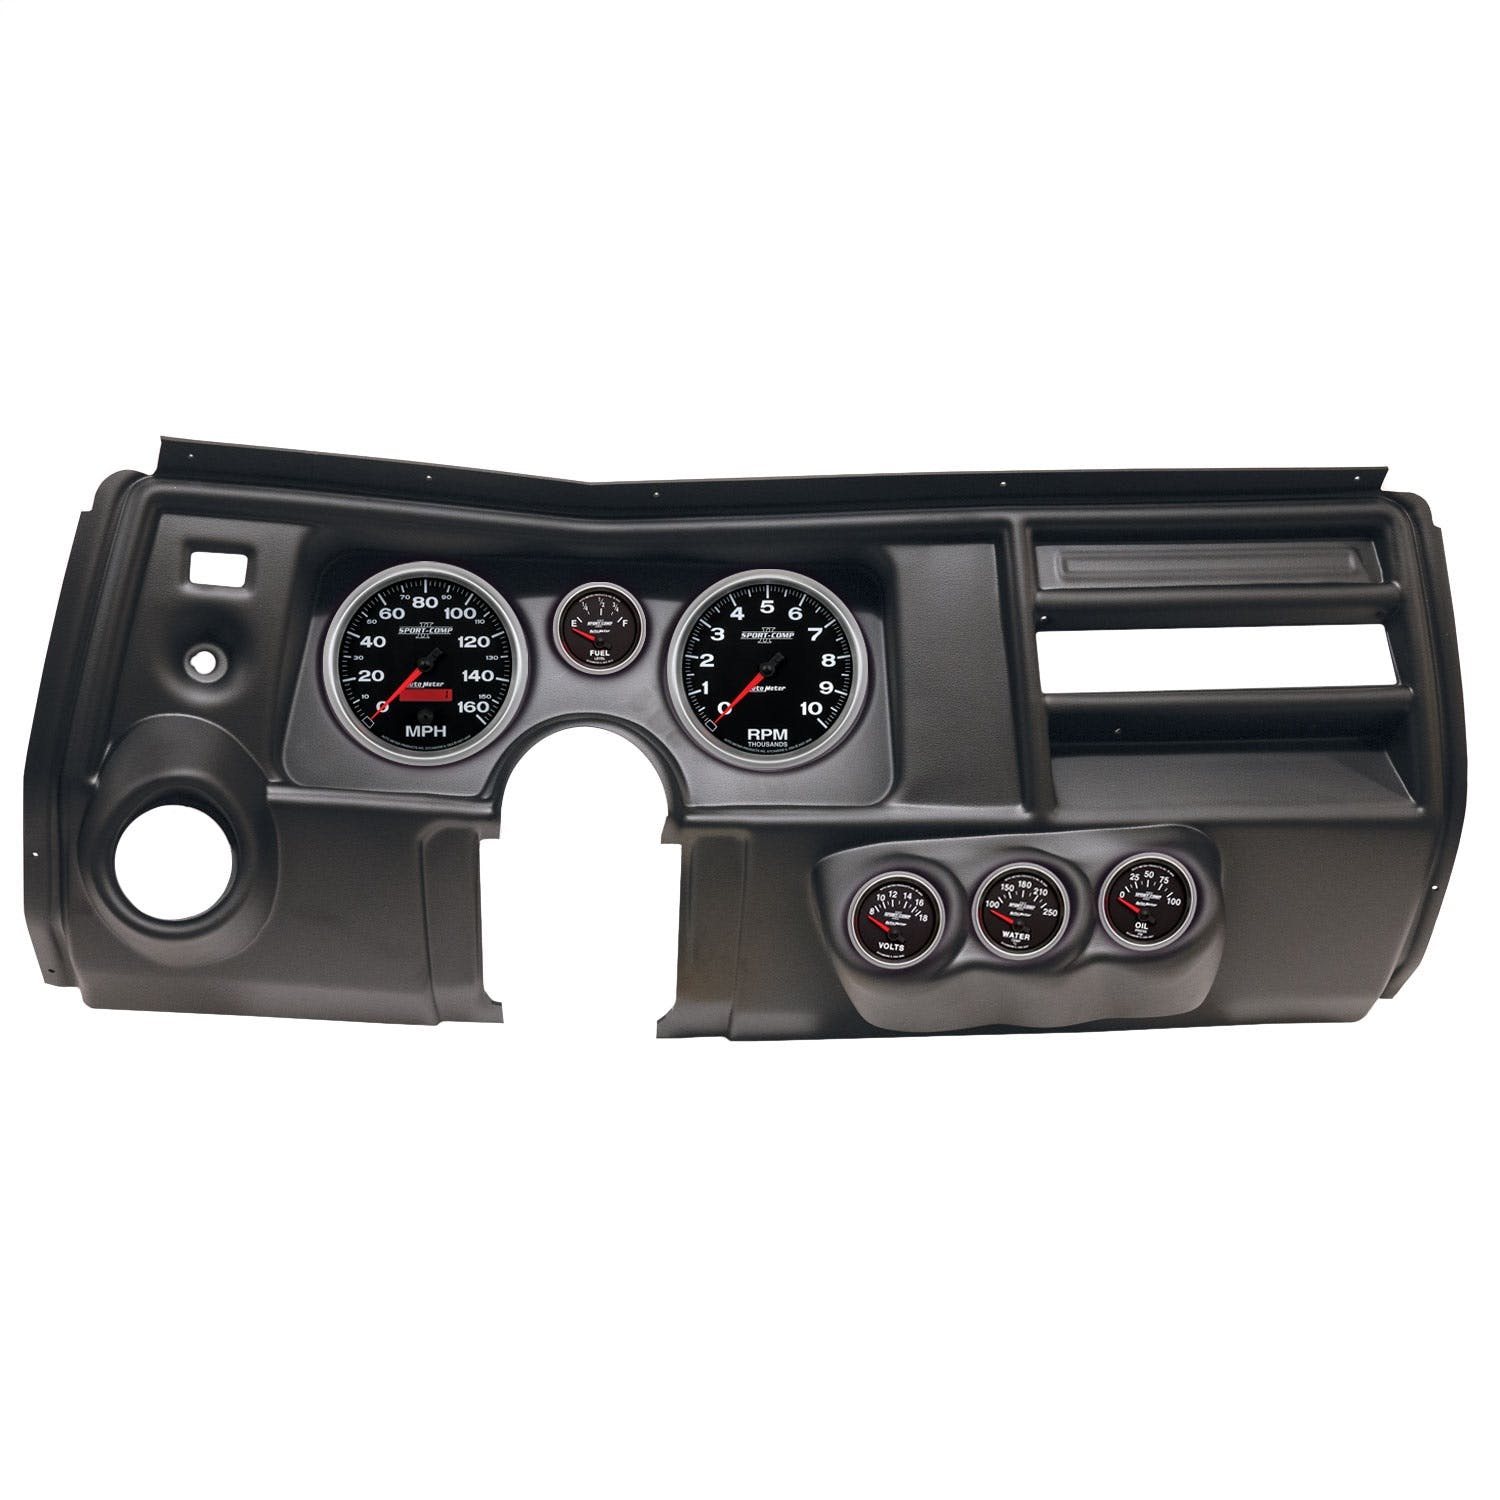 AutoMeter Products 2911-12 6 Gauge Direct-Fit Dash Kit, Chevy Chevelle Vent 69, Sport-Comp II